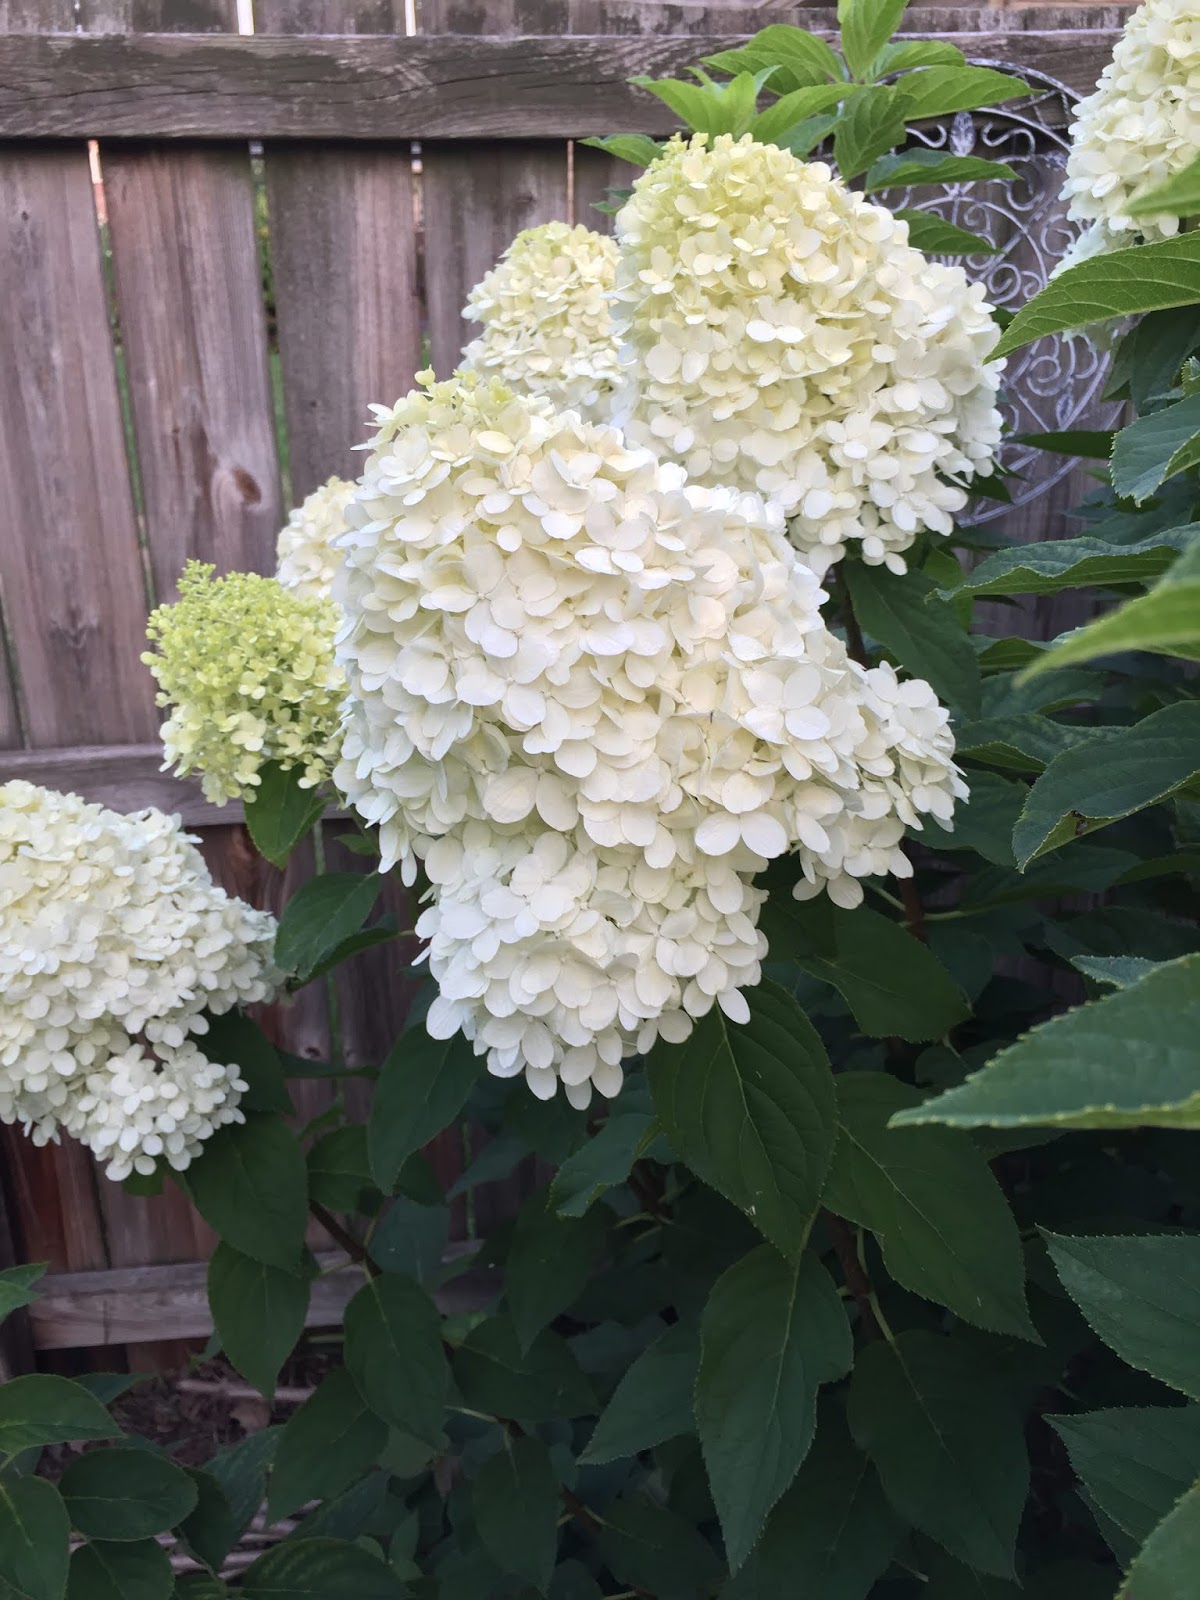 Limelight And Little Lime Hydrangea Great Shrubs For Any Garden